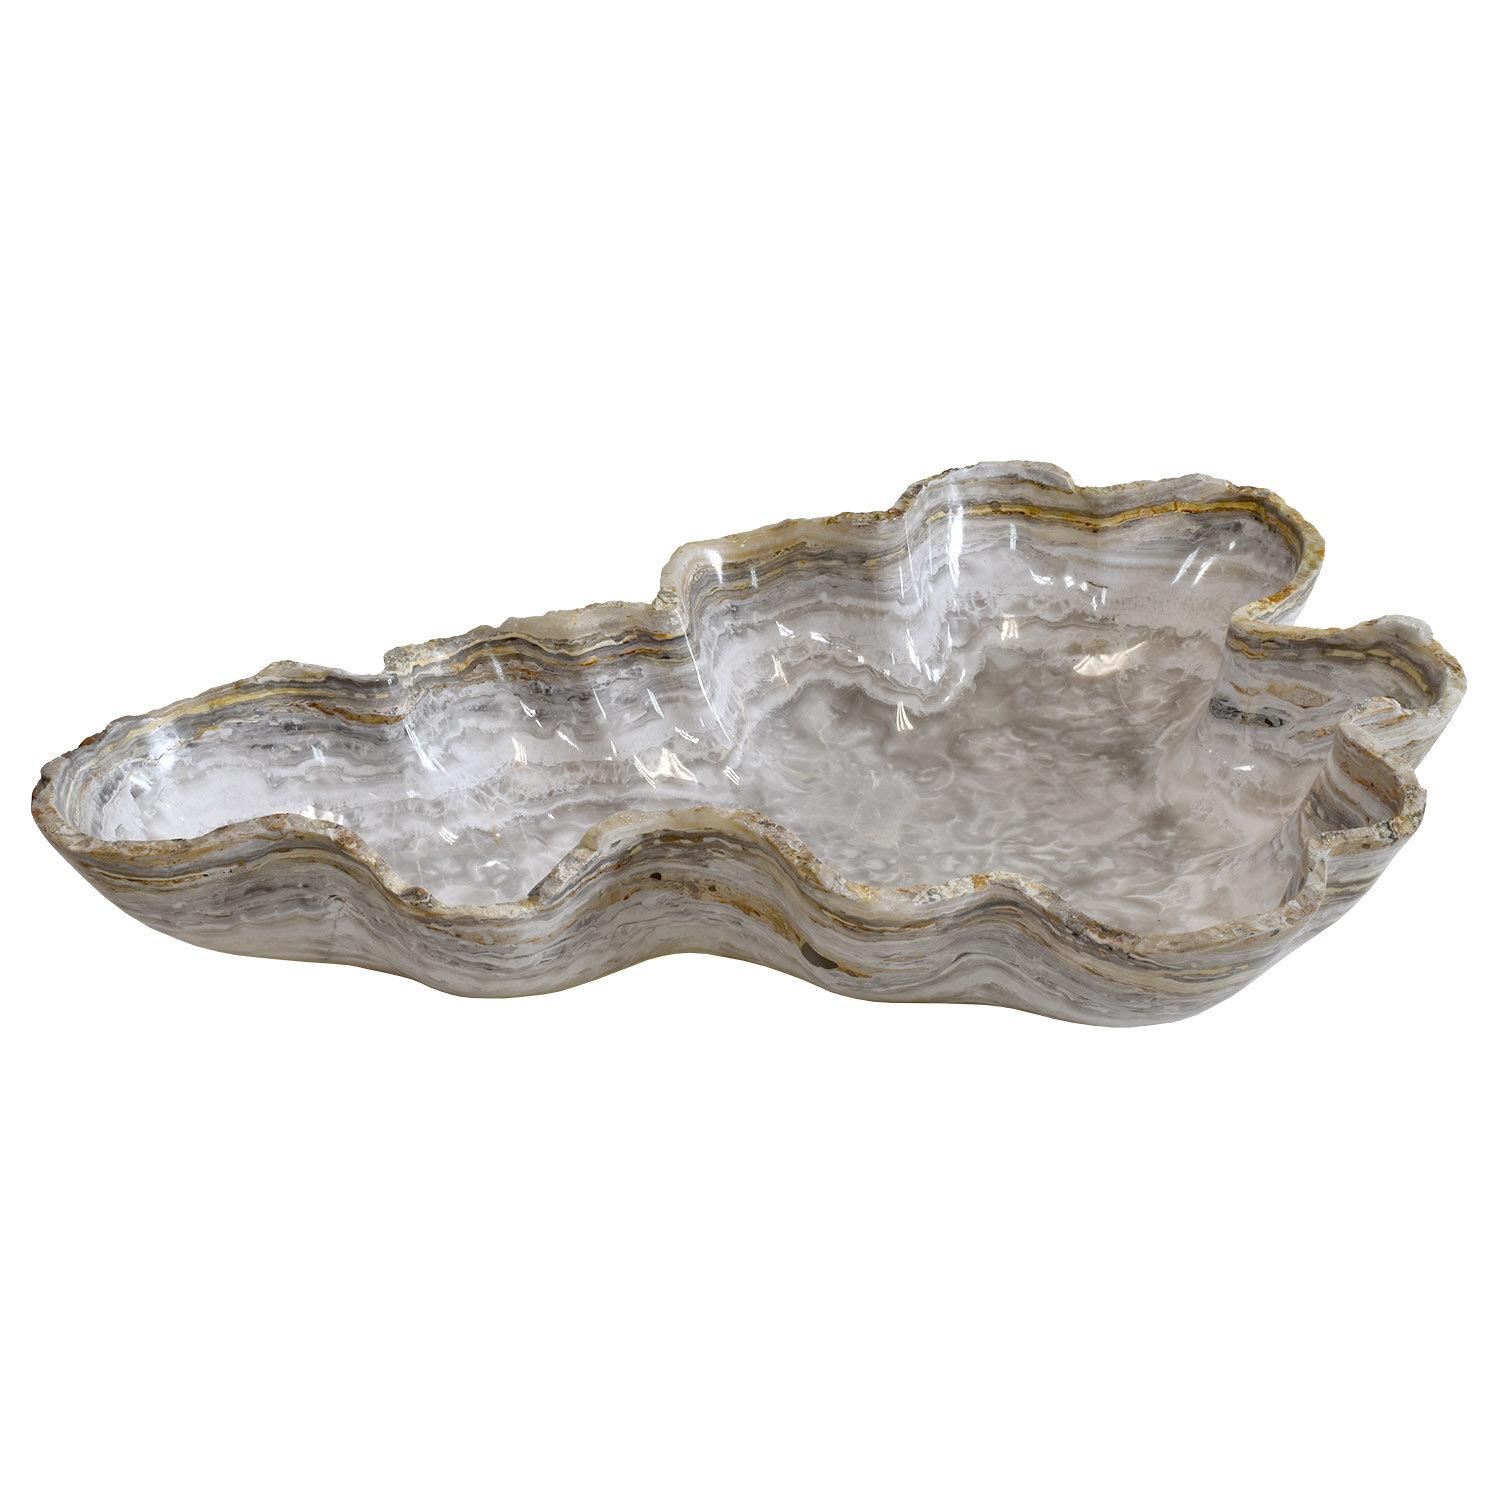 Handmade in Mexico
Carved from a single piece of onyx
One of a kind
Dimensions: 23 x 17 x 4.25 in. / 60 x 43 x 10 cm

A fluted, almost to the point of frilly, organic “oyster” shaped of vessel from naturally colored stone with the mineral